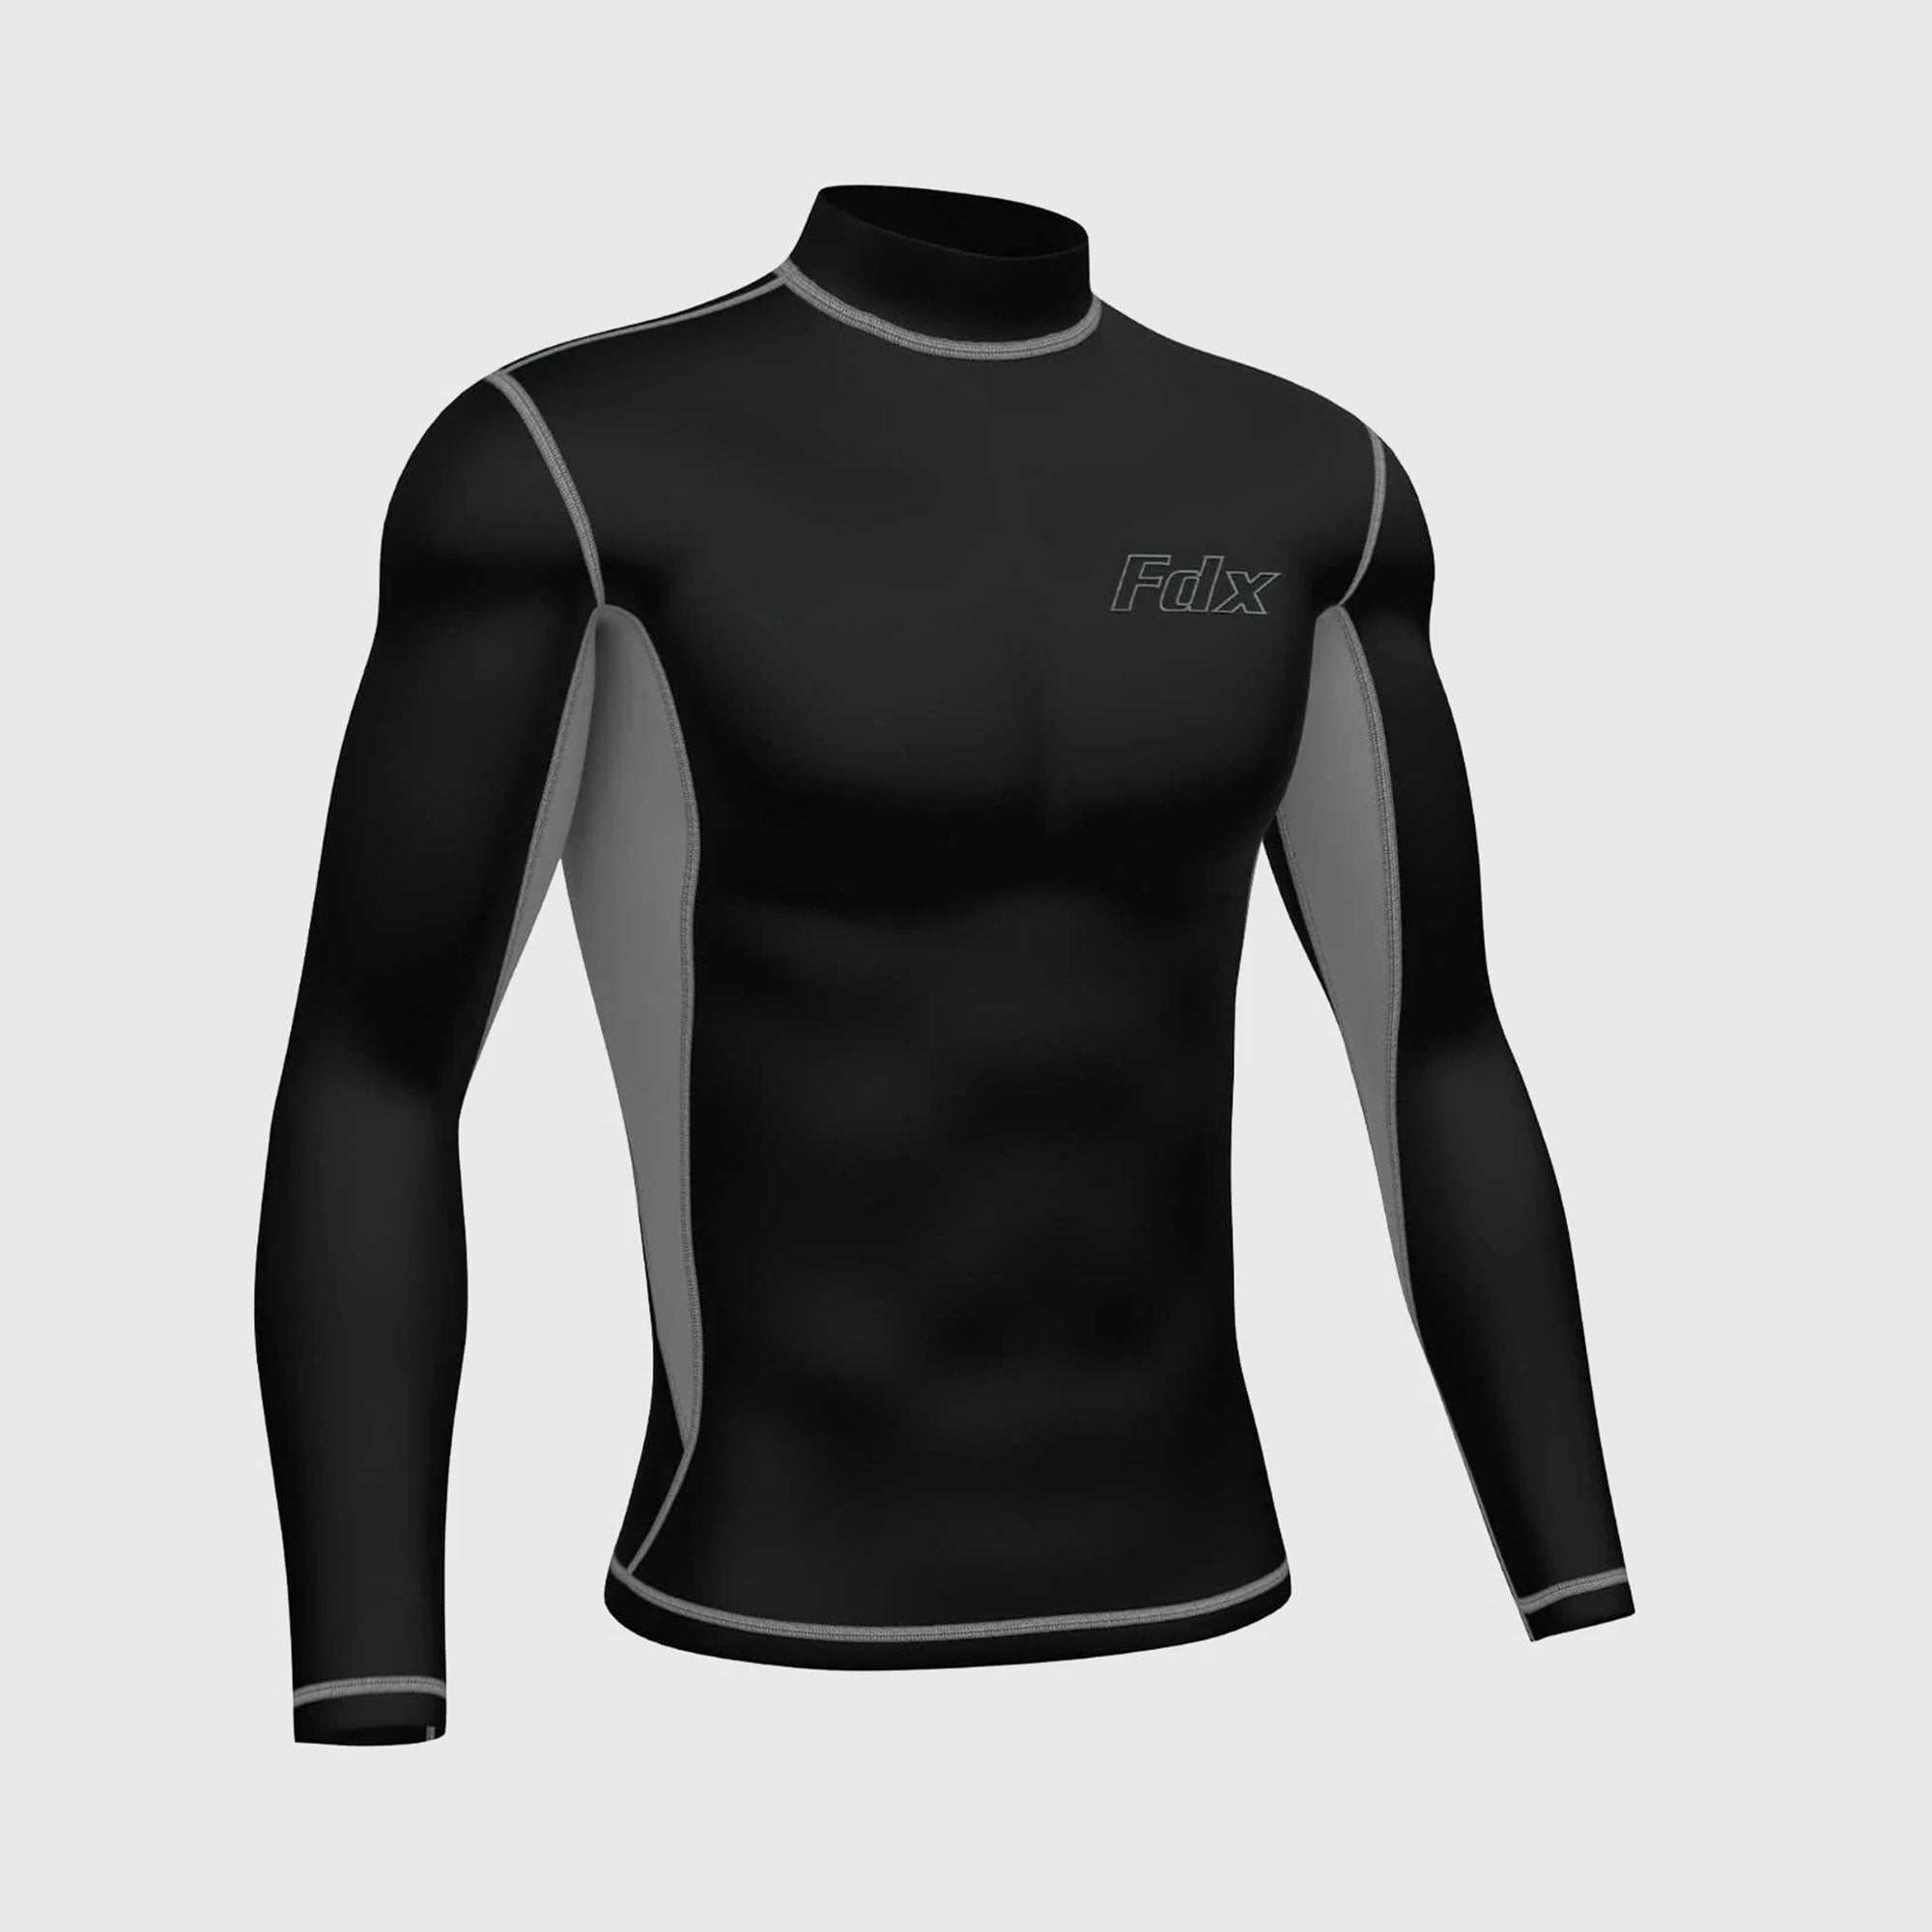 Related: Grey/Black Men 2 Long Sleeve Base Layer Top